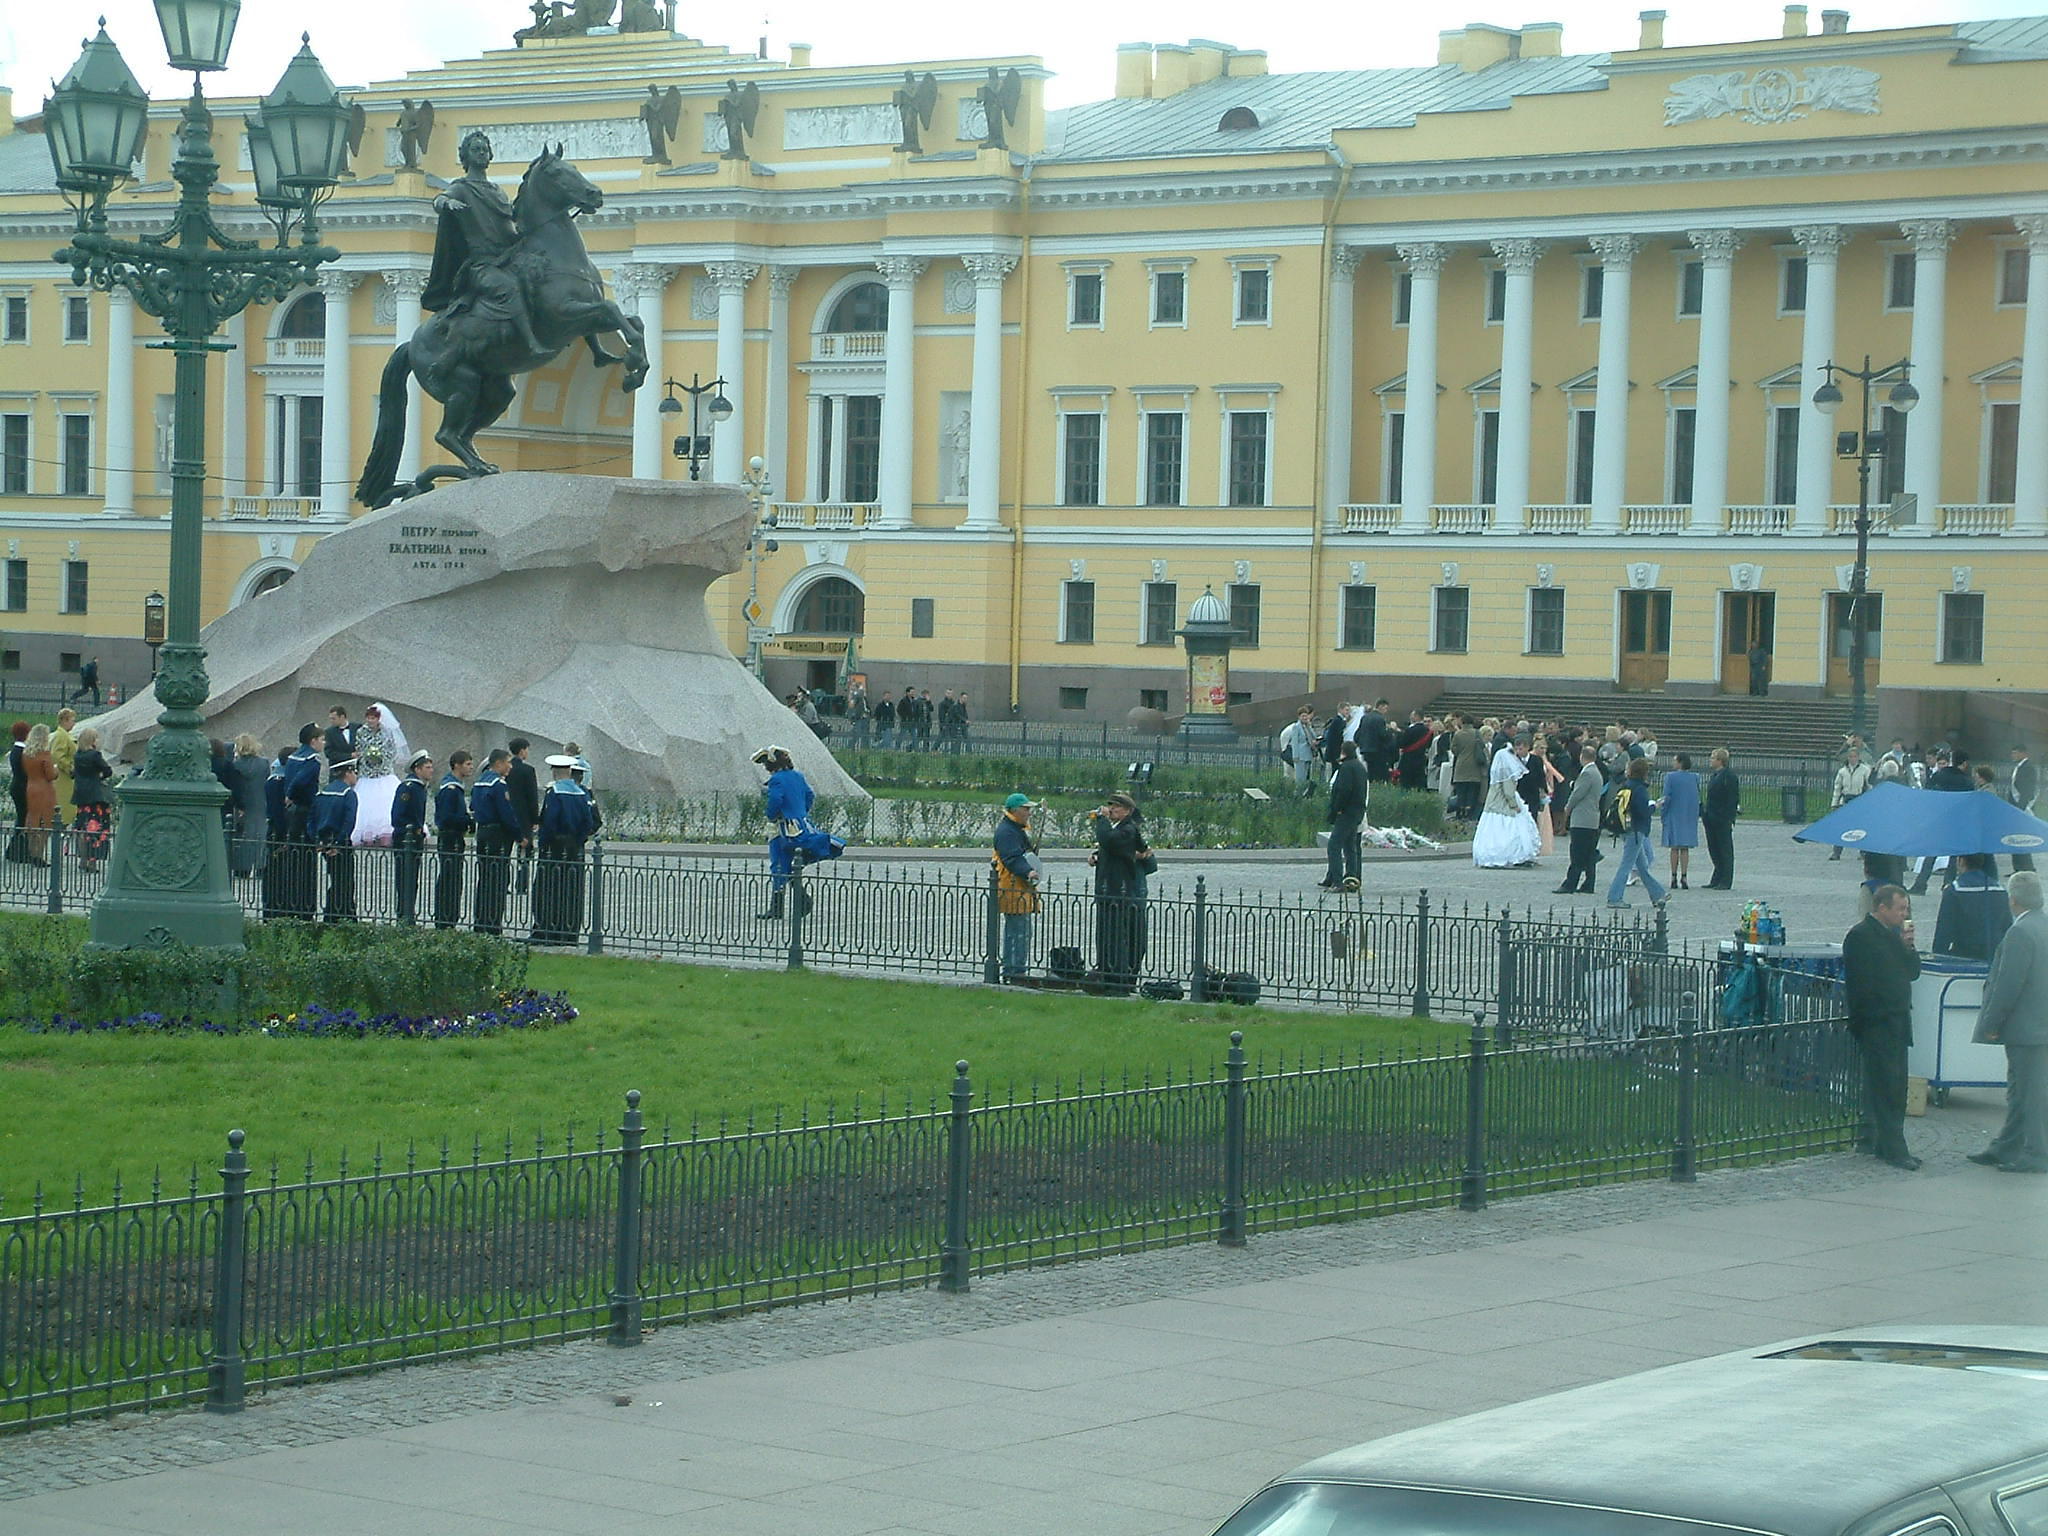 A monument of Peter the Great, the founder of the city